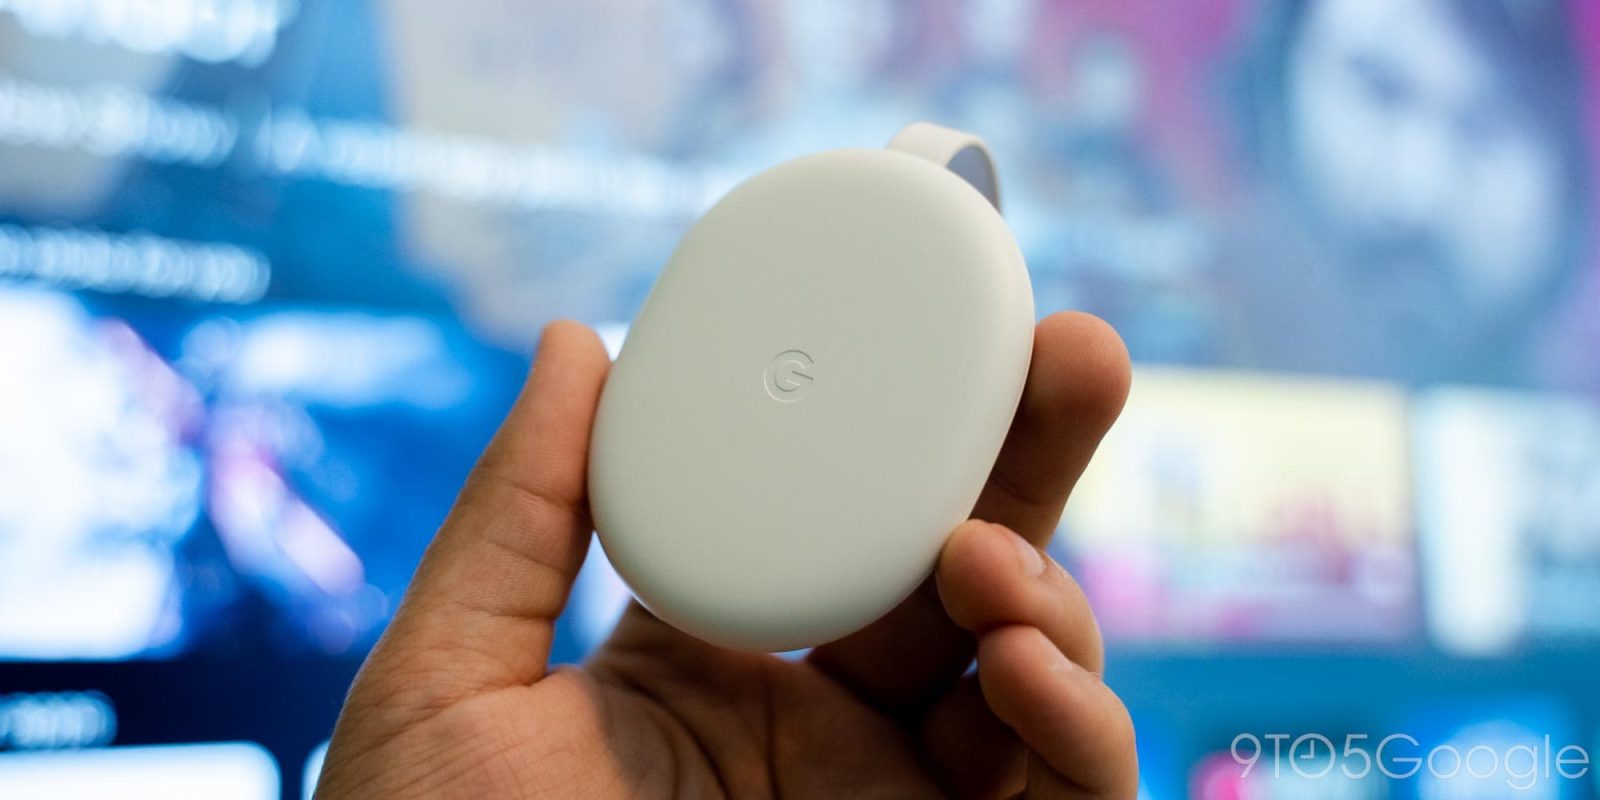 Chromecast with Google TV HD has extra storage available